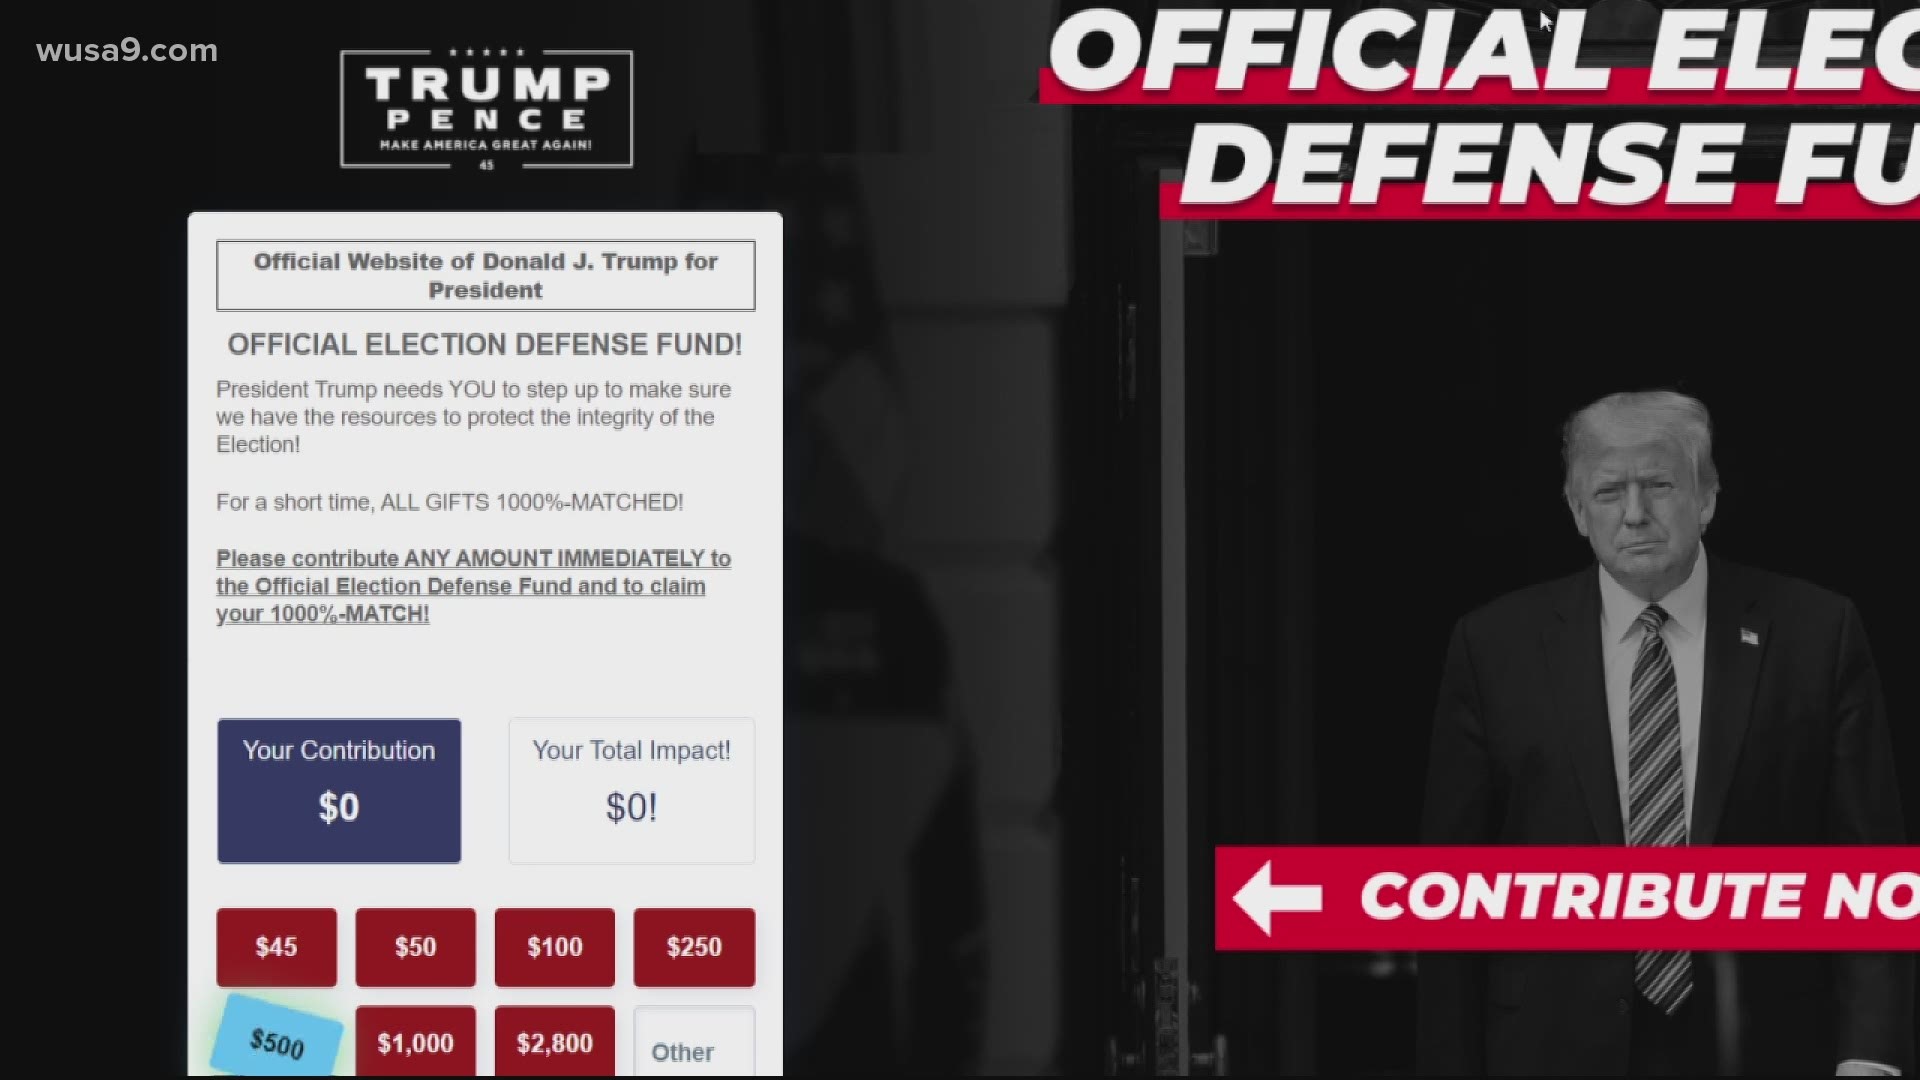 Verify Money for Trump's election defense fund goes elesewhere